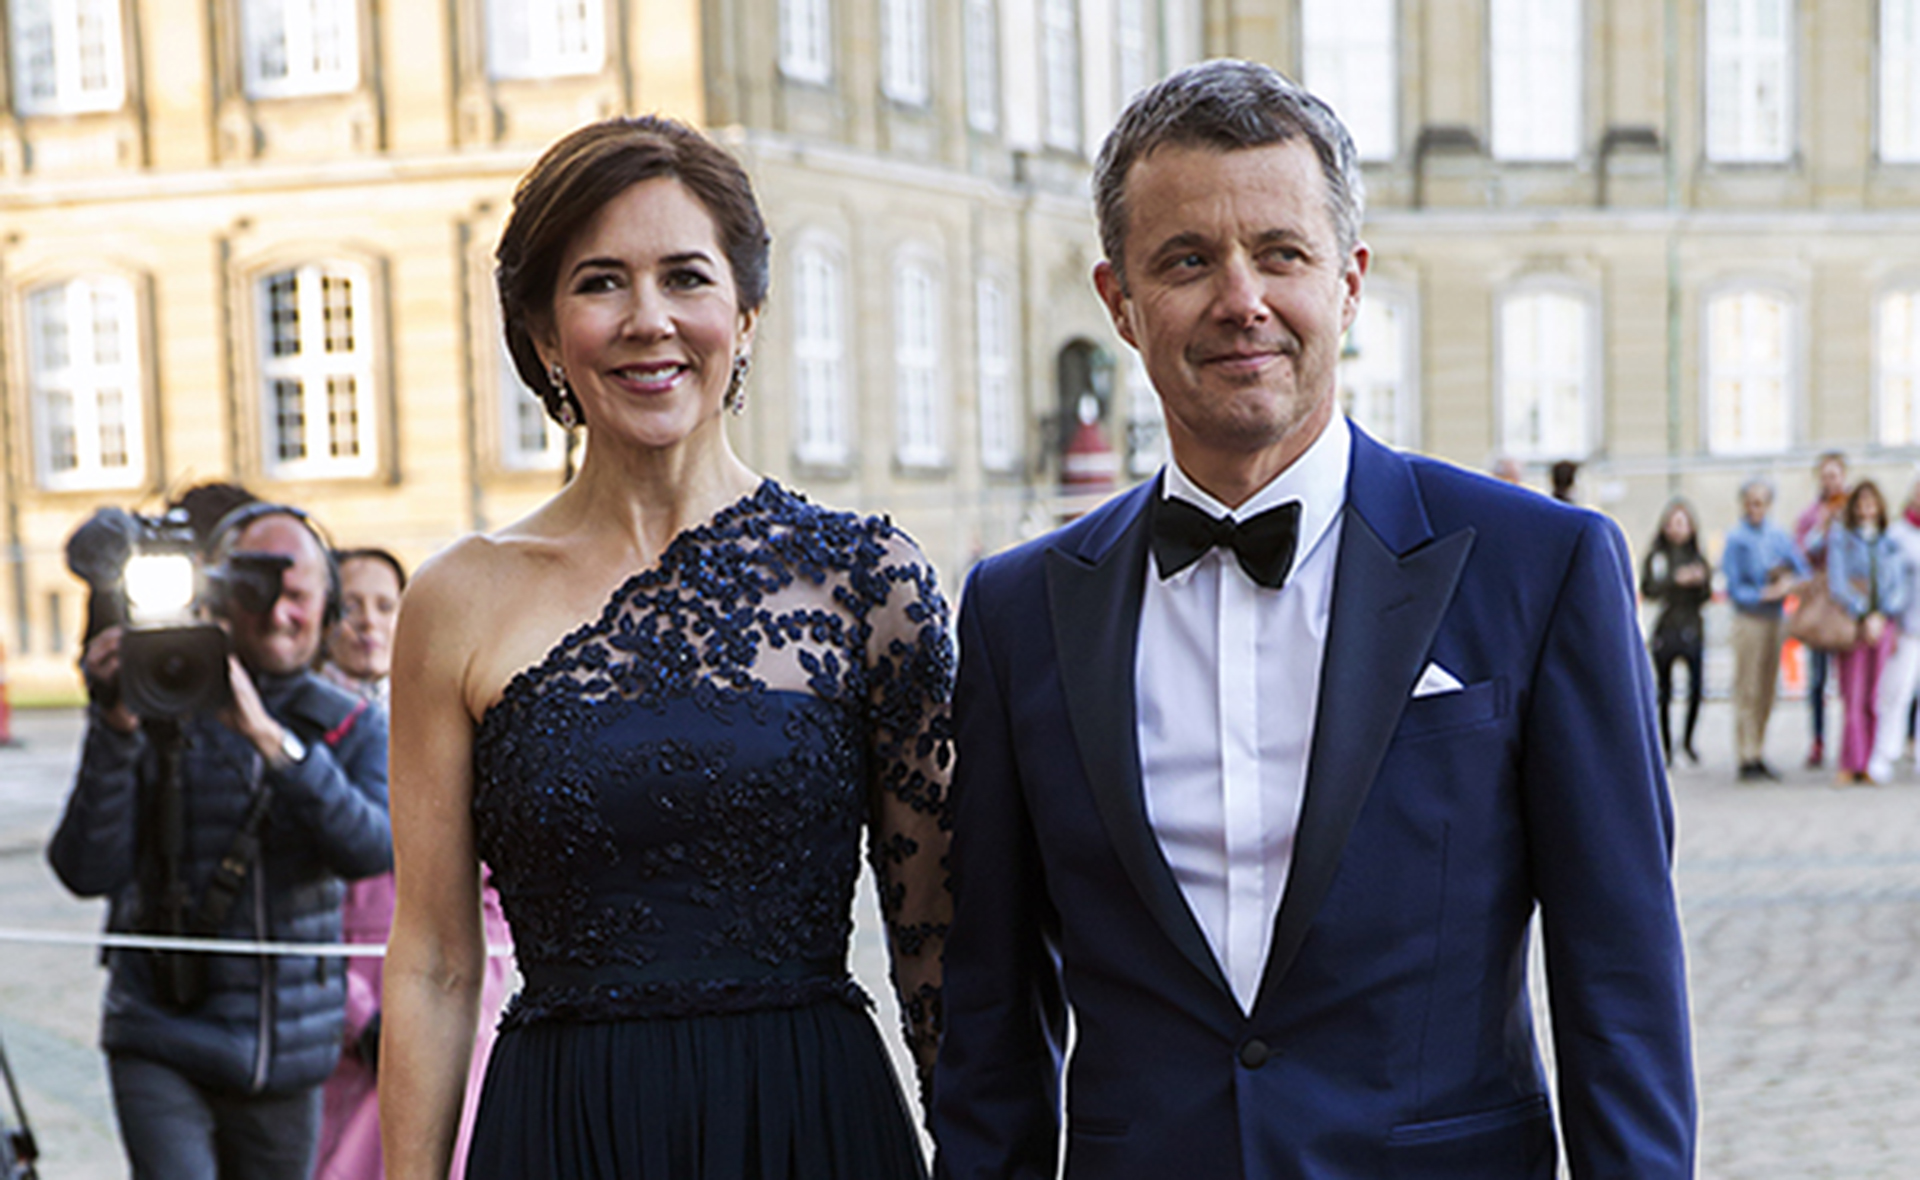 Princess Mary of Denmark is among the mysterious absences at Queen Elizabeth II’s funeral